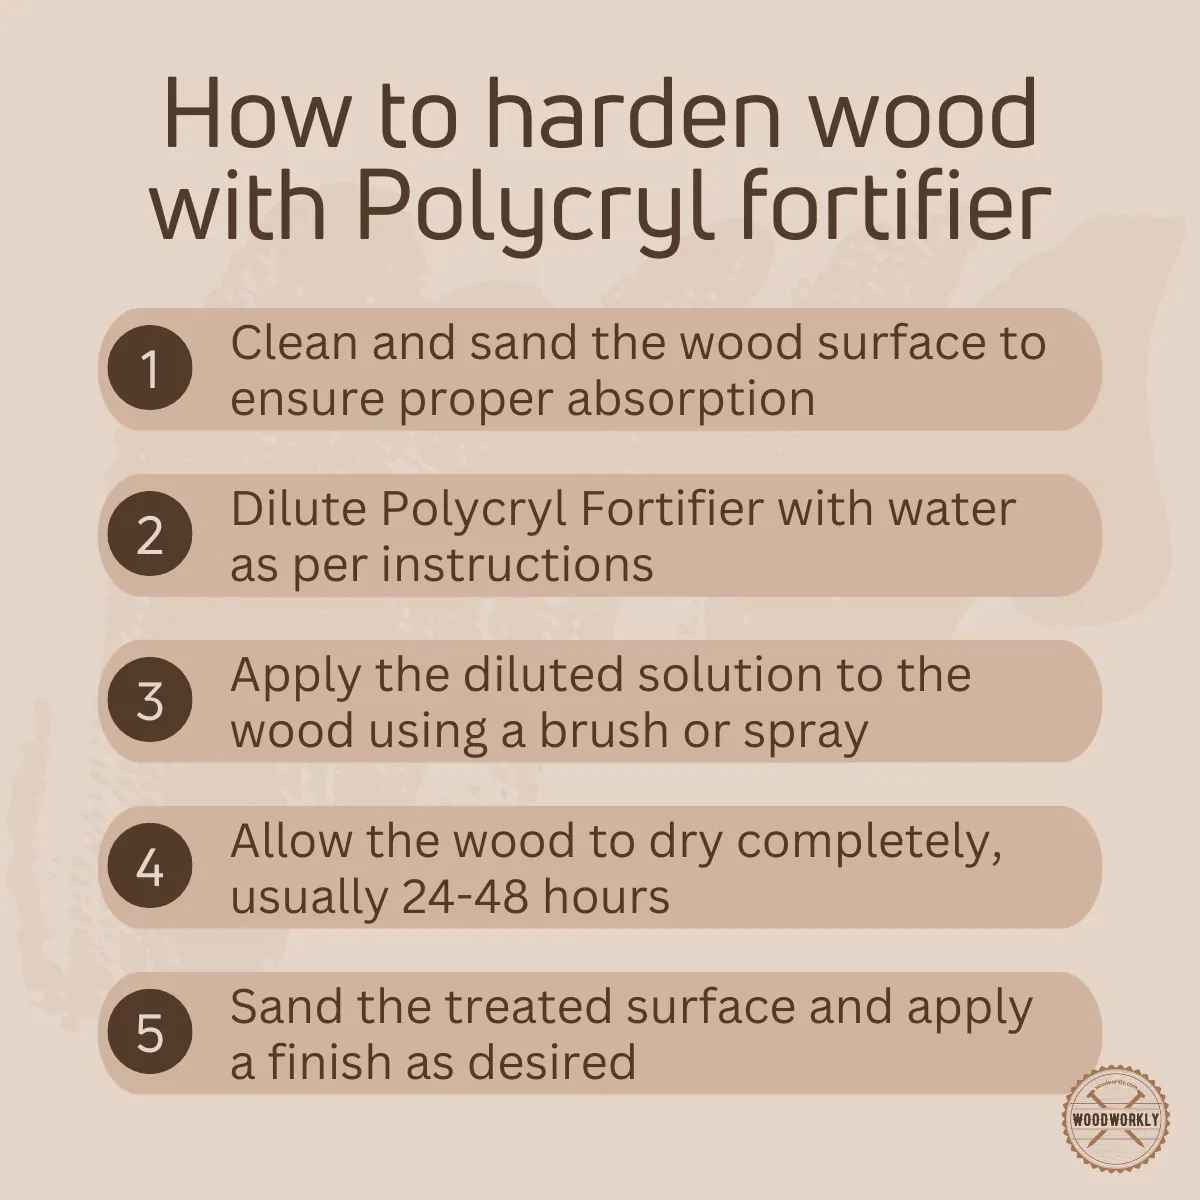 How to harden wood with Polycryl fortifier